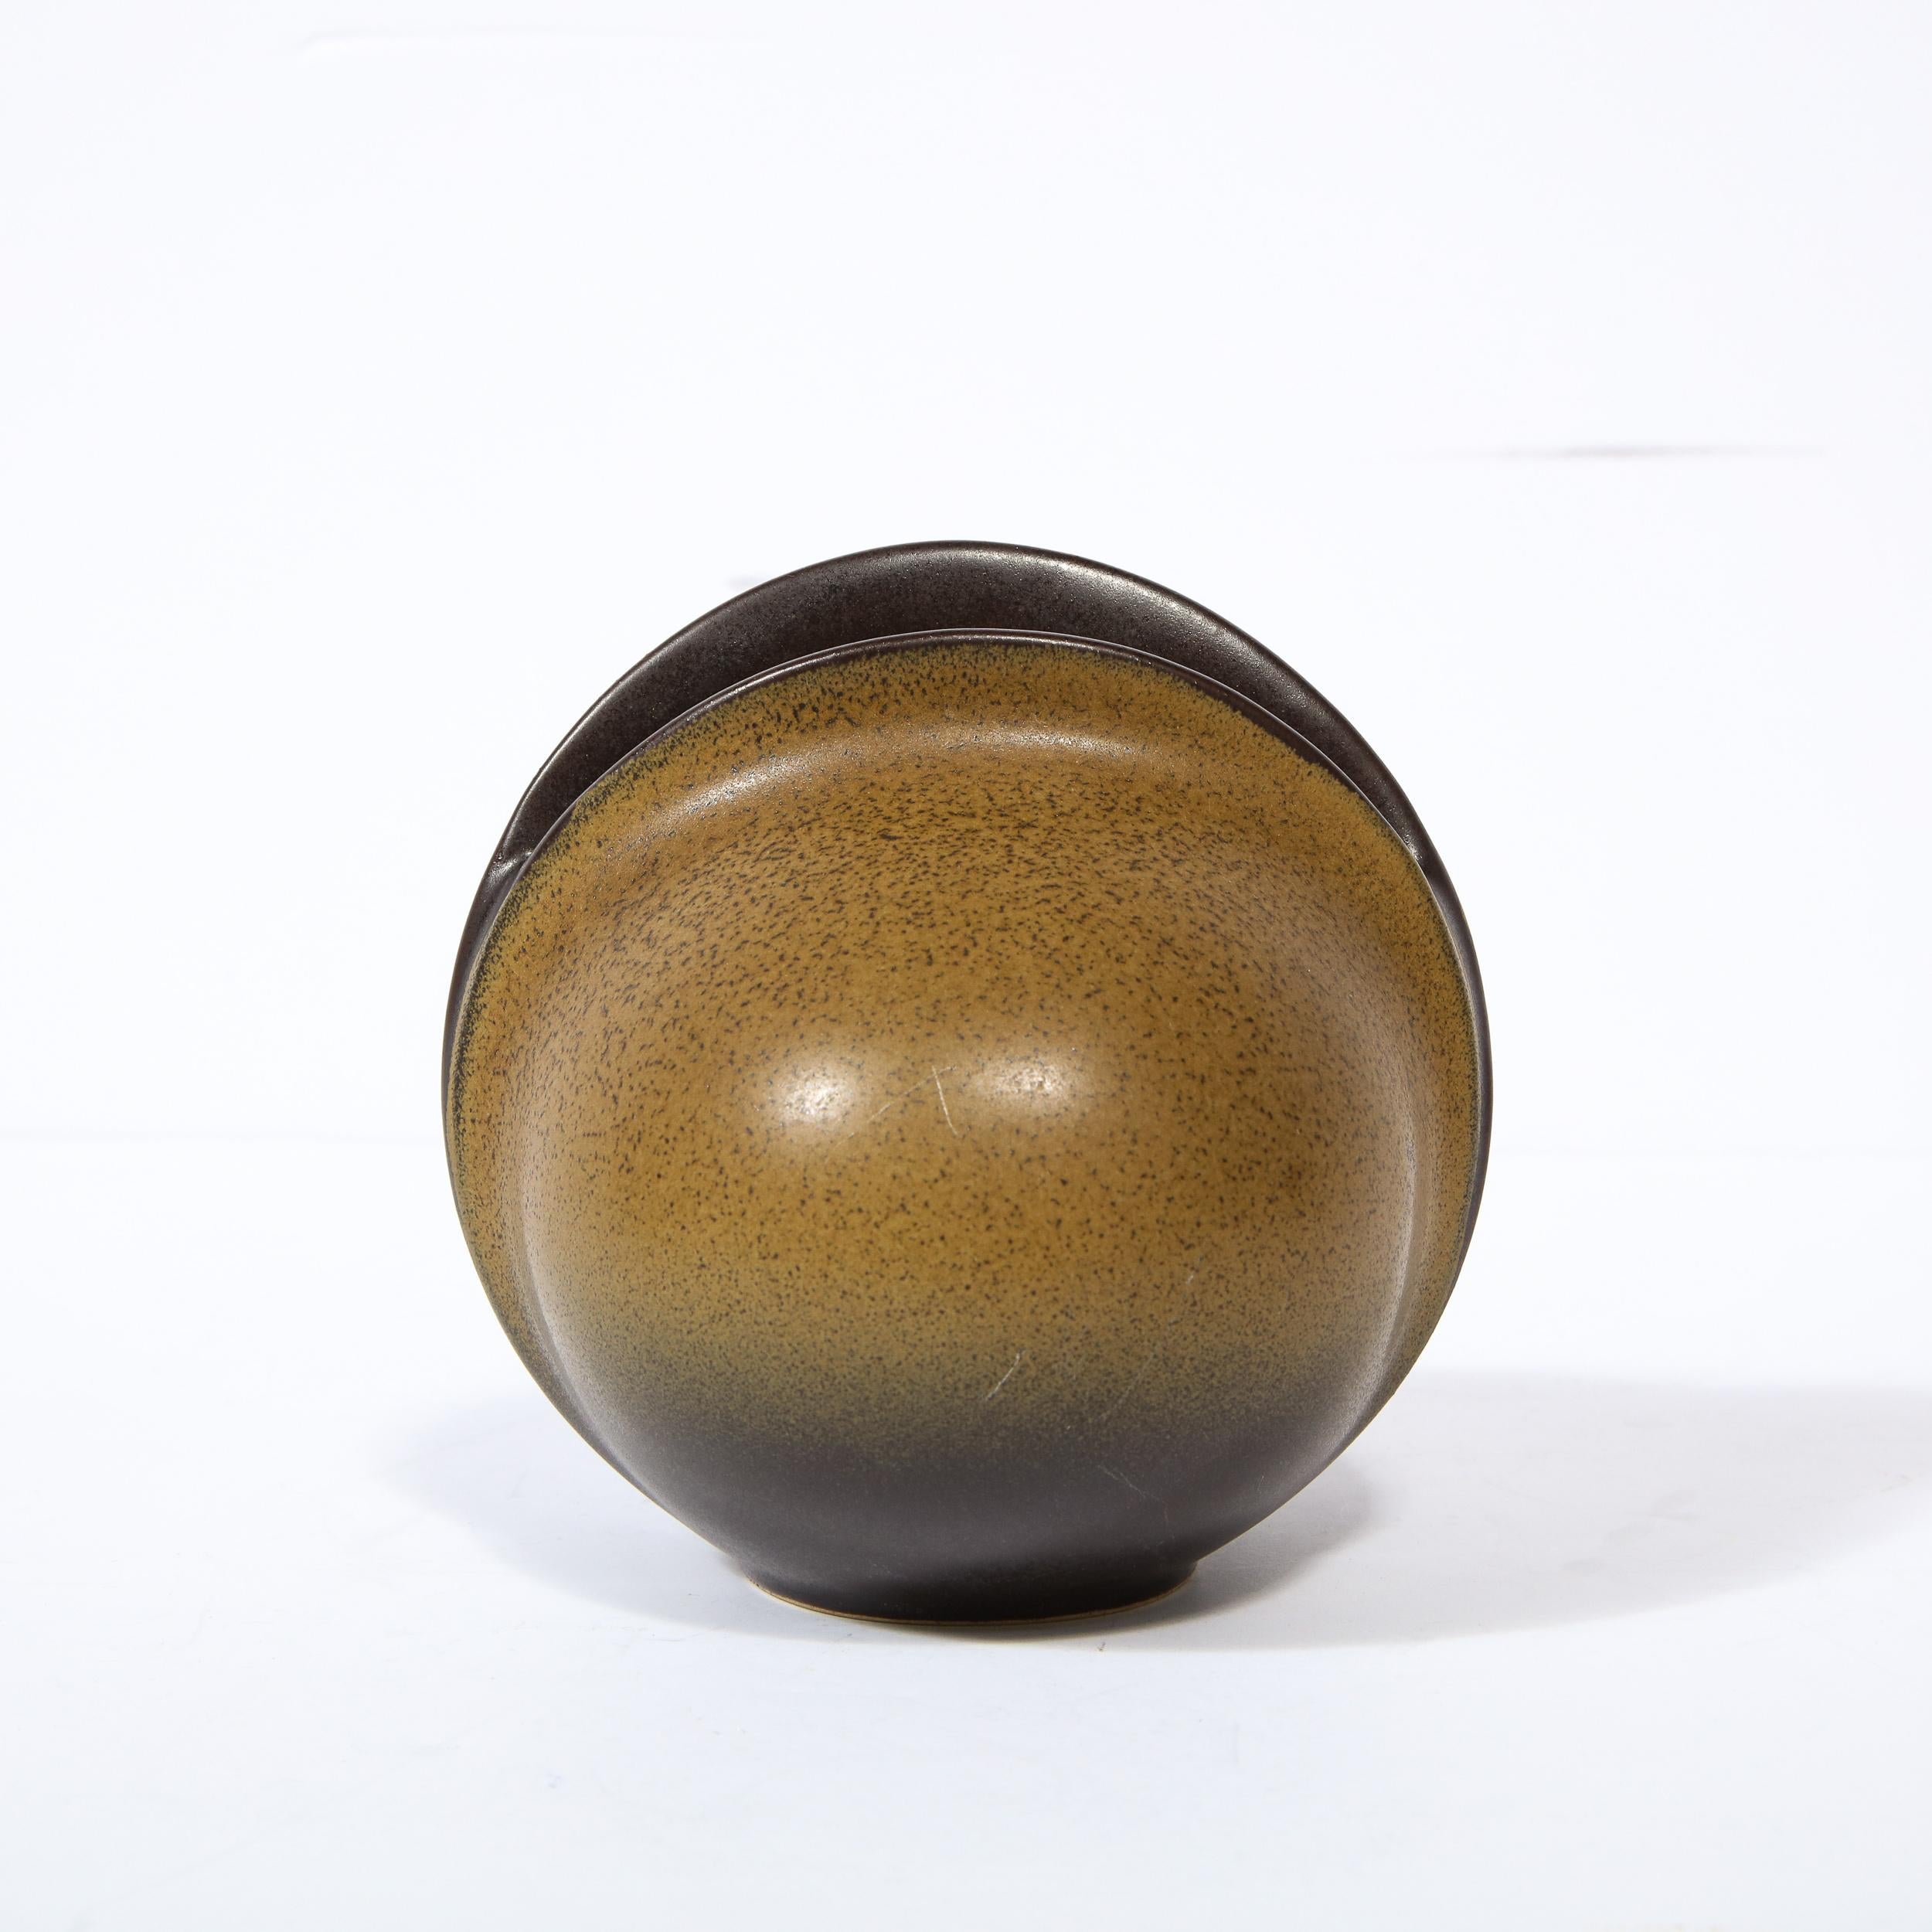 German Mid-Century Modern Sculptural Spherical Vase with Ovoid Opening by Rosenthal